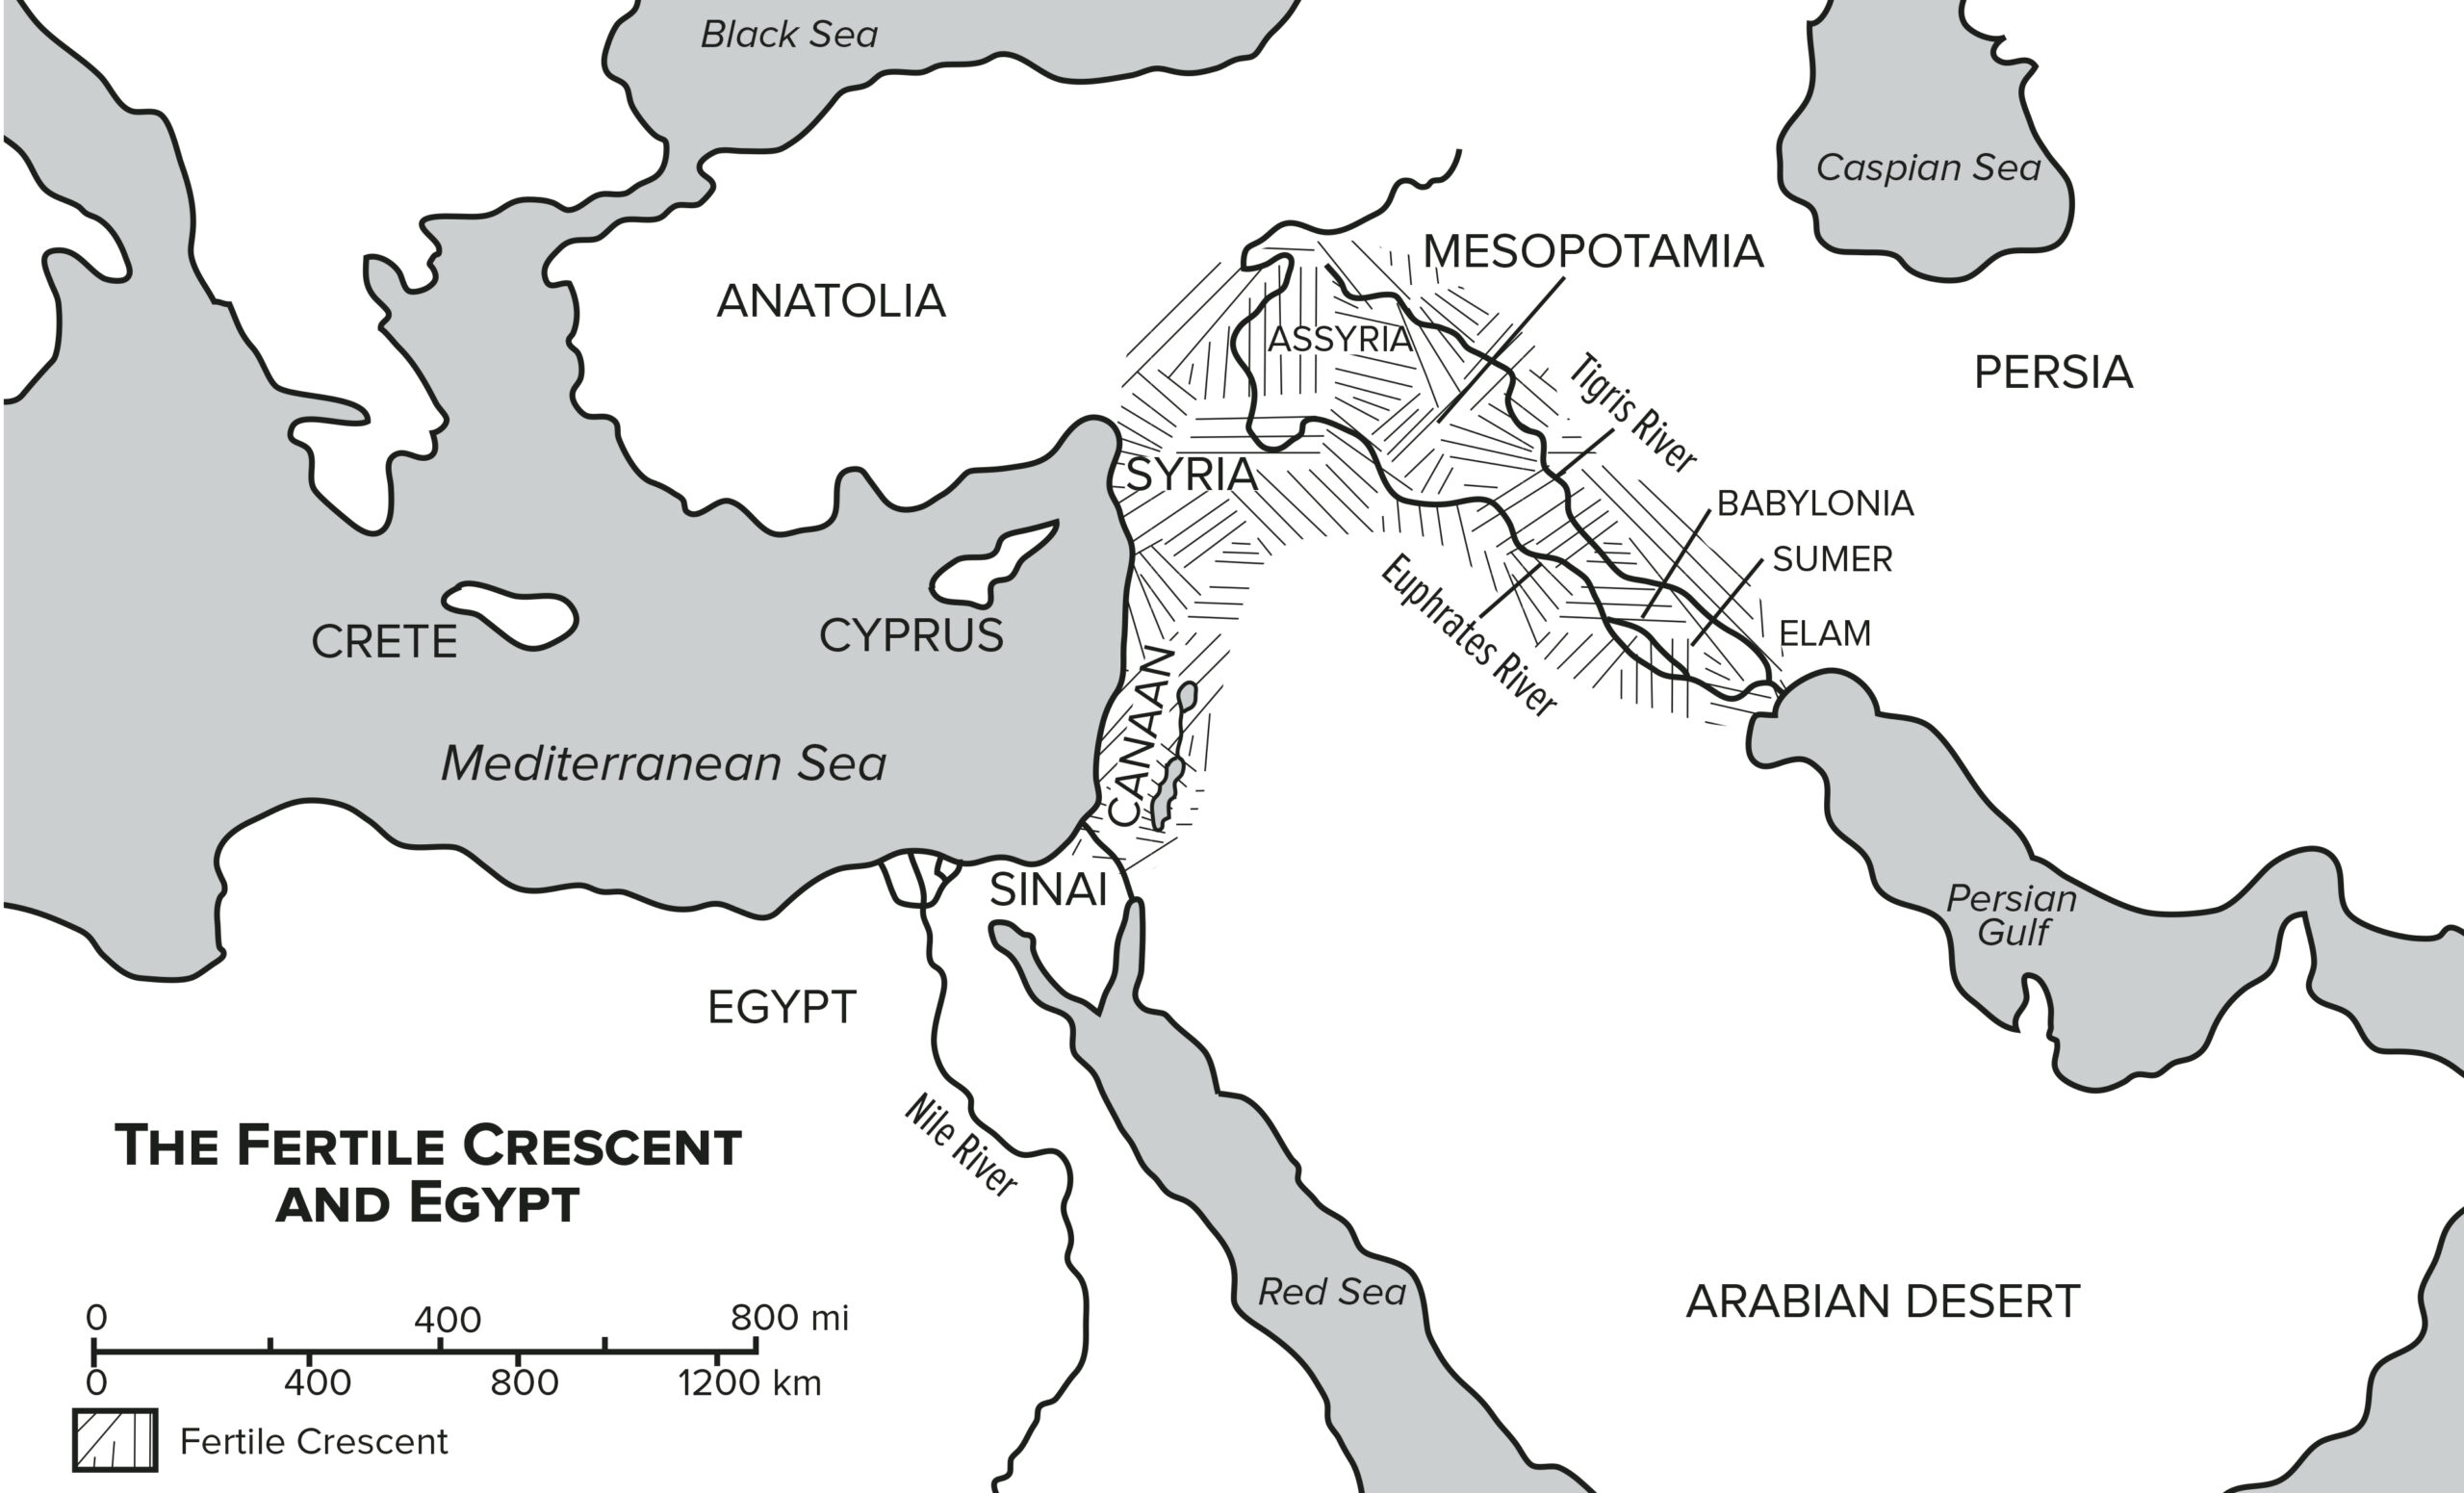 The Fertile Crescent and Egypt